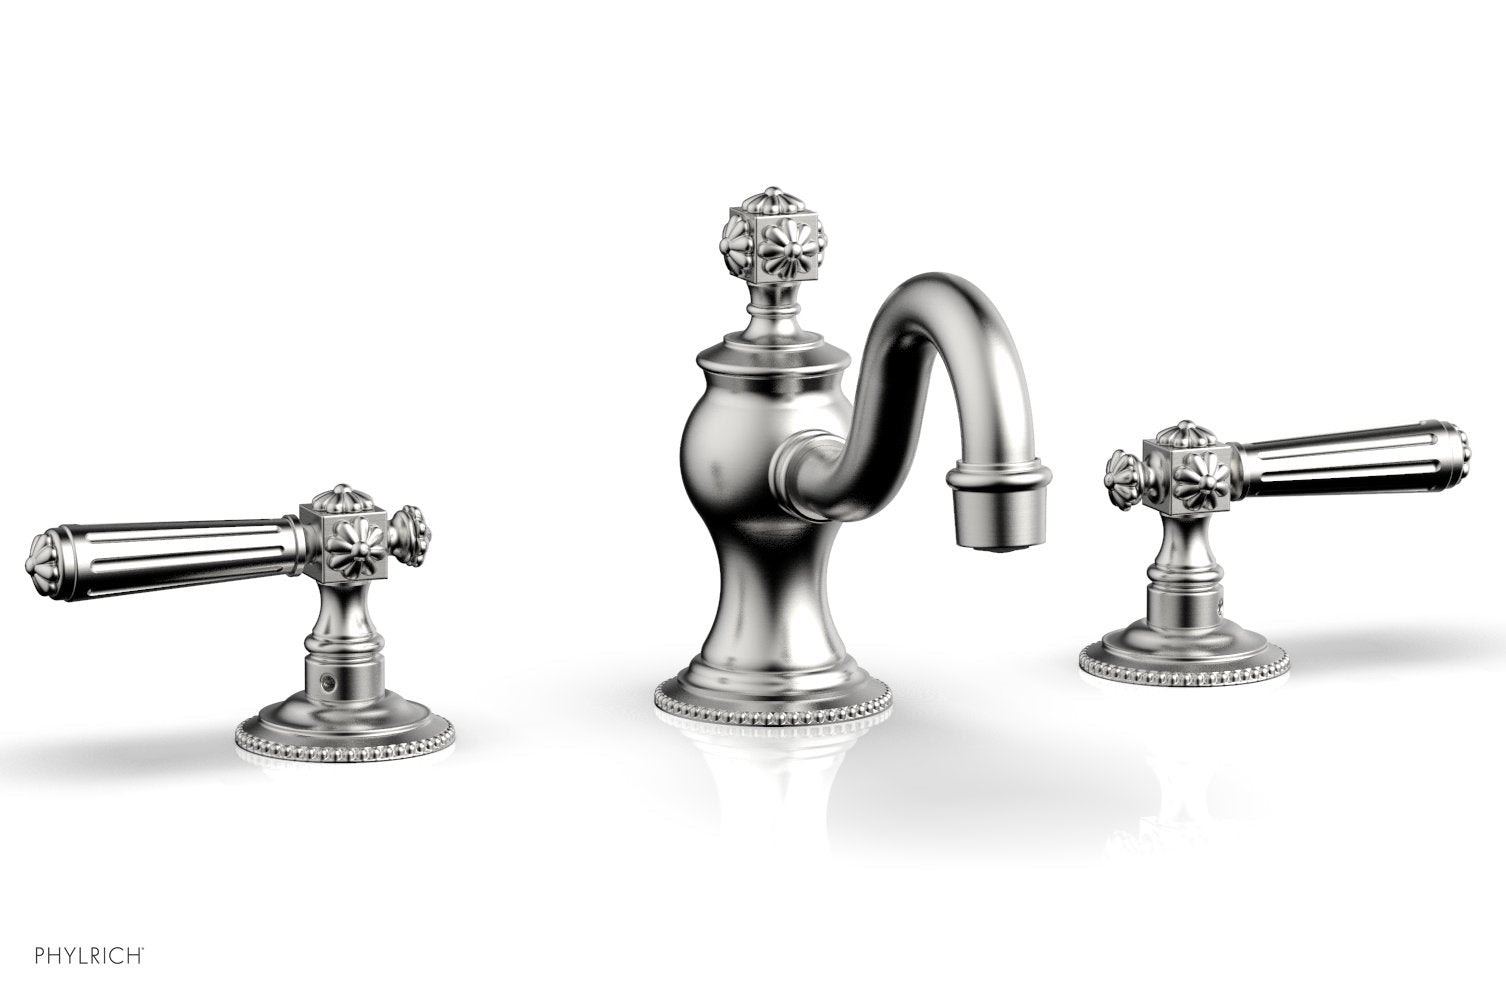 Phylrich MARVELLE Widespread Faucet lever Handles